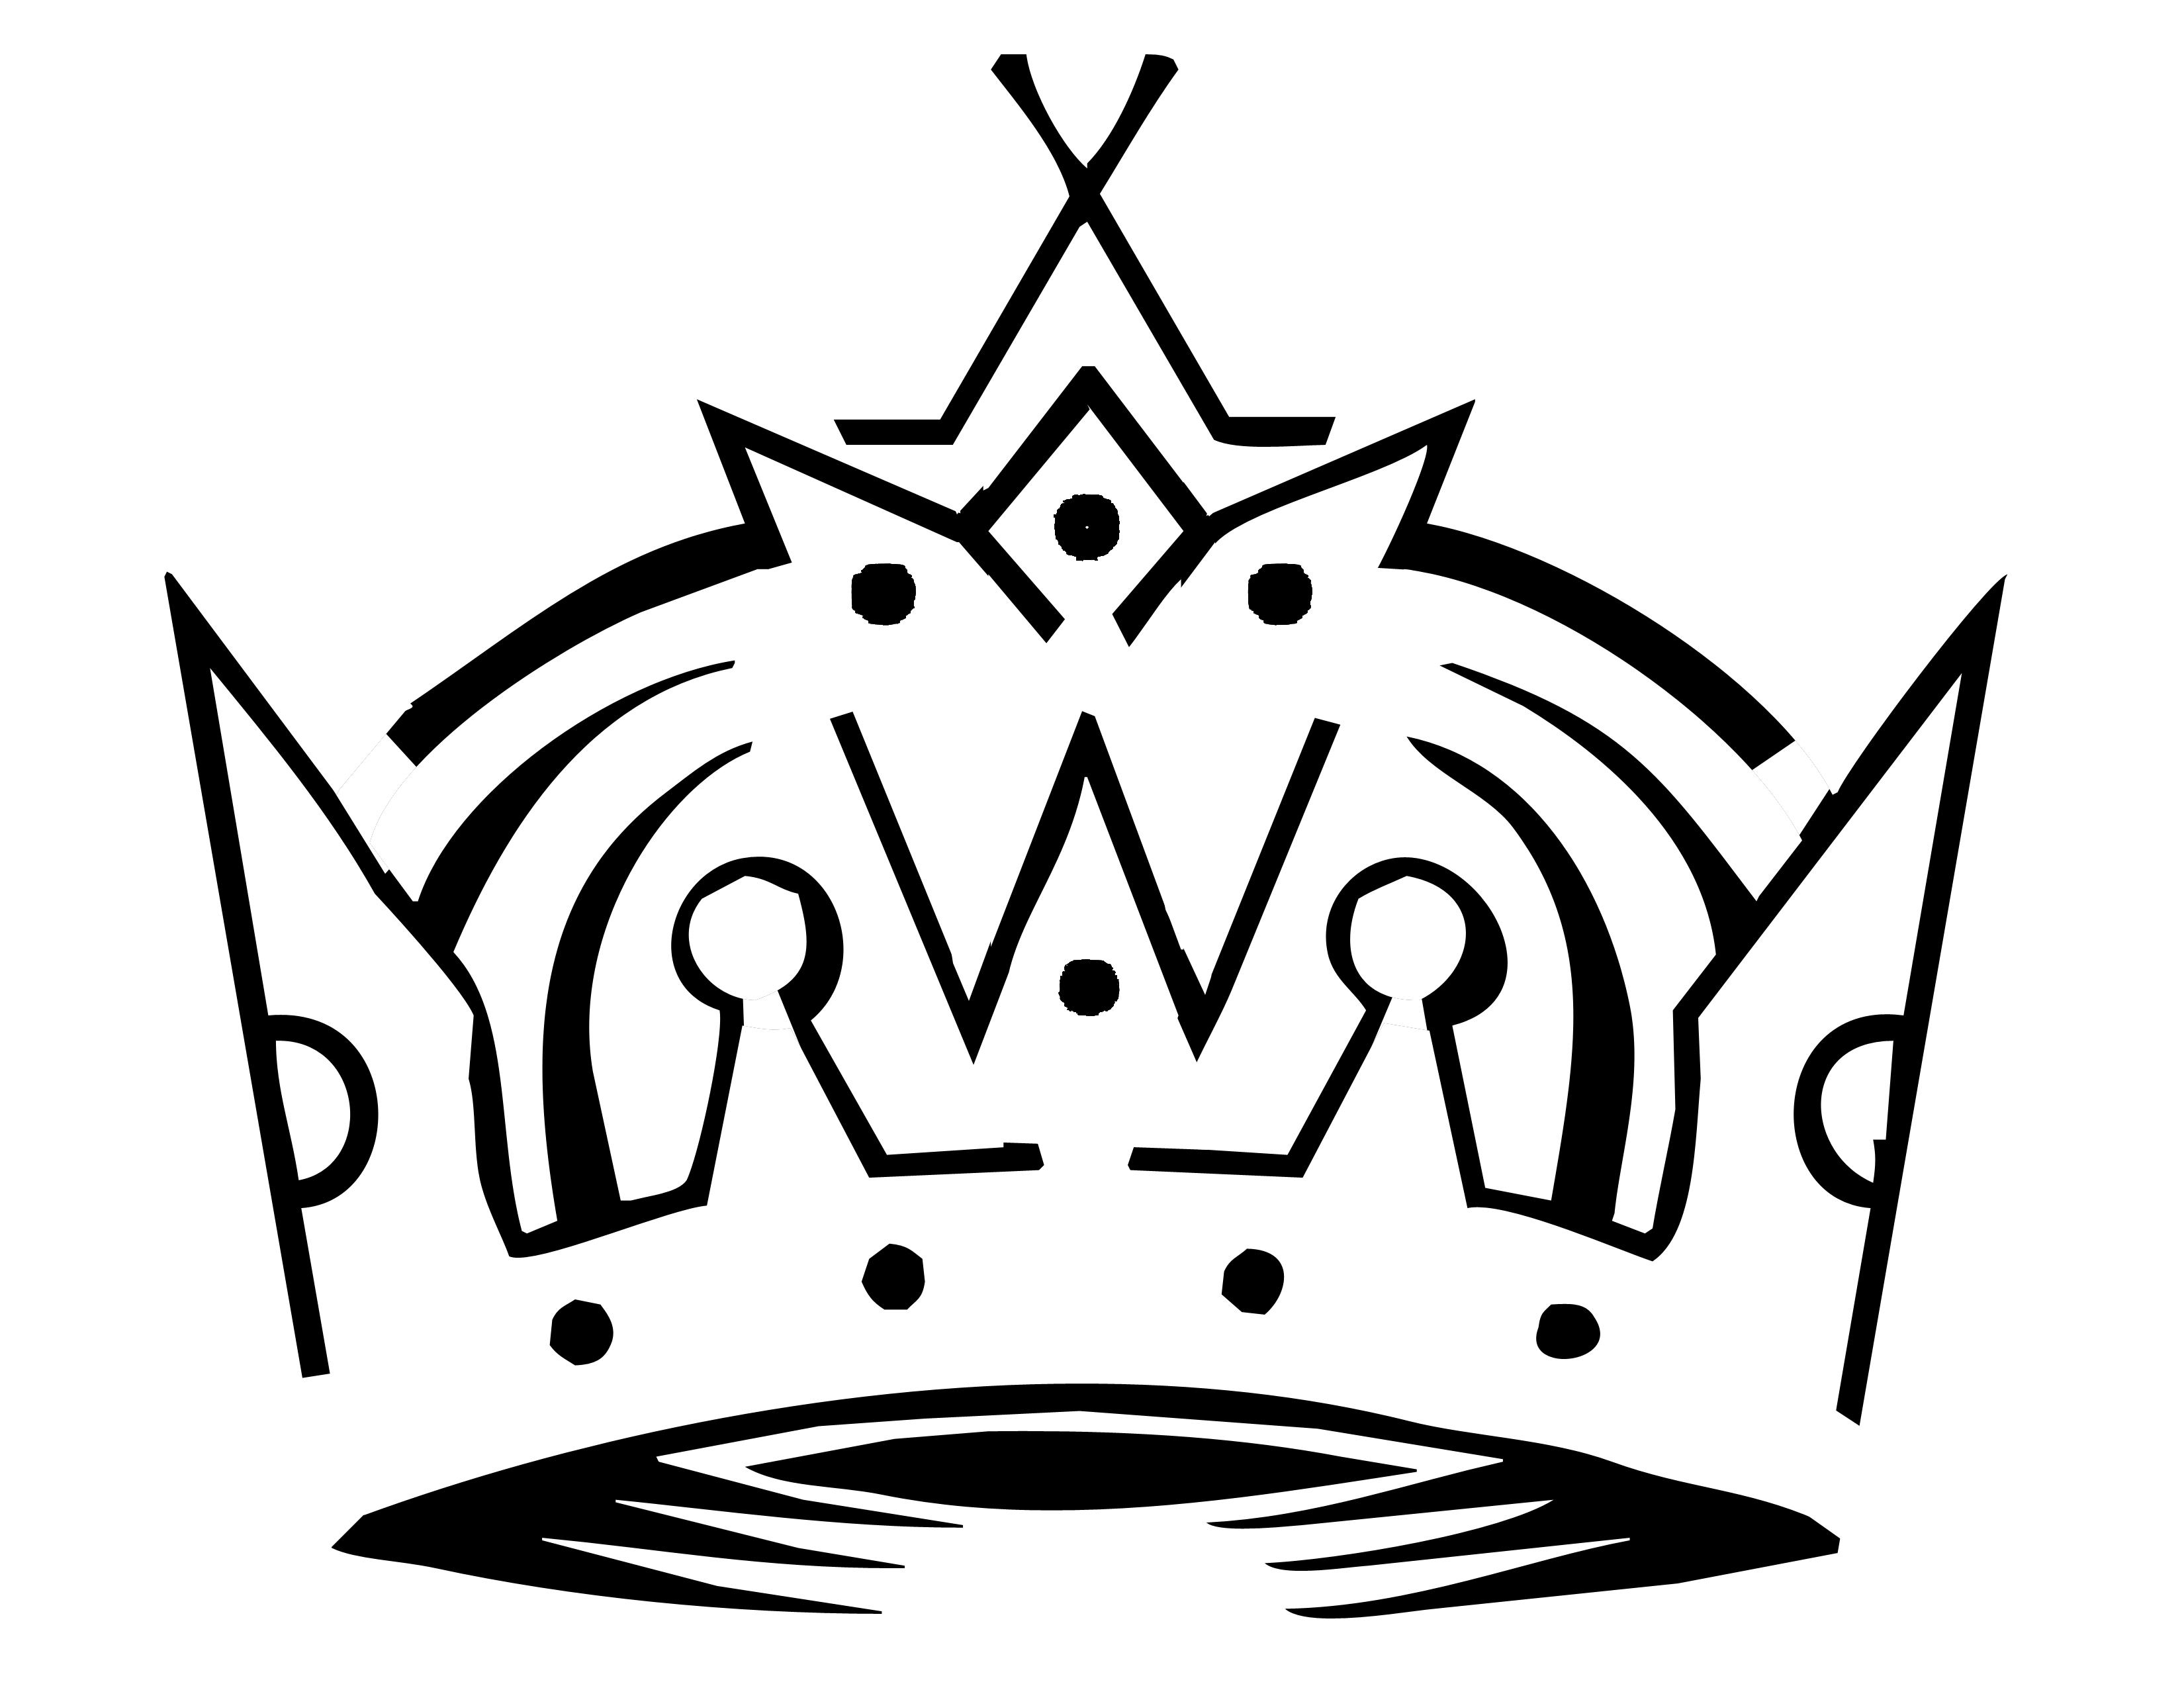 Crown Line Drawing - ClipArt Best